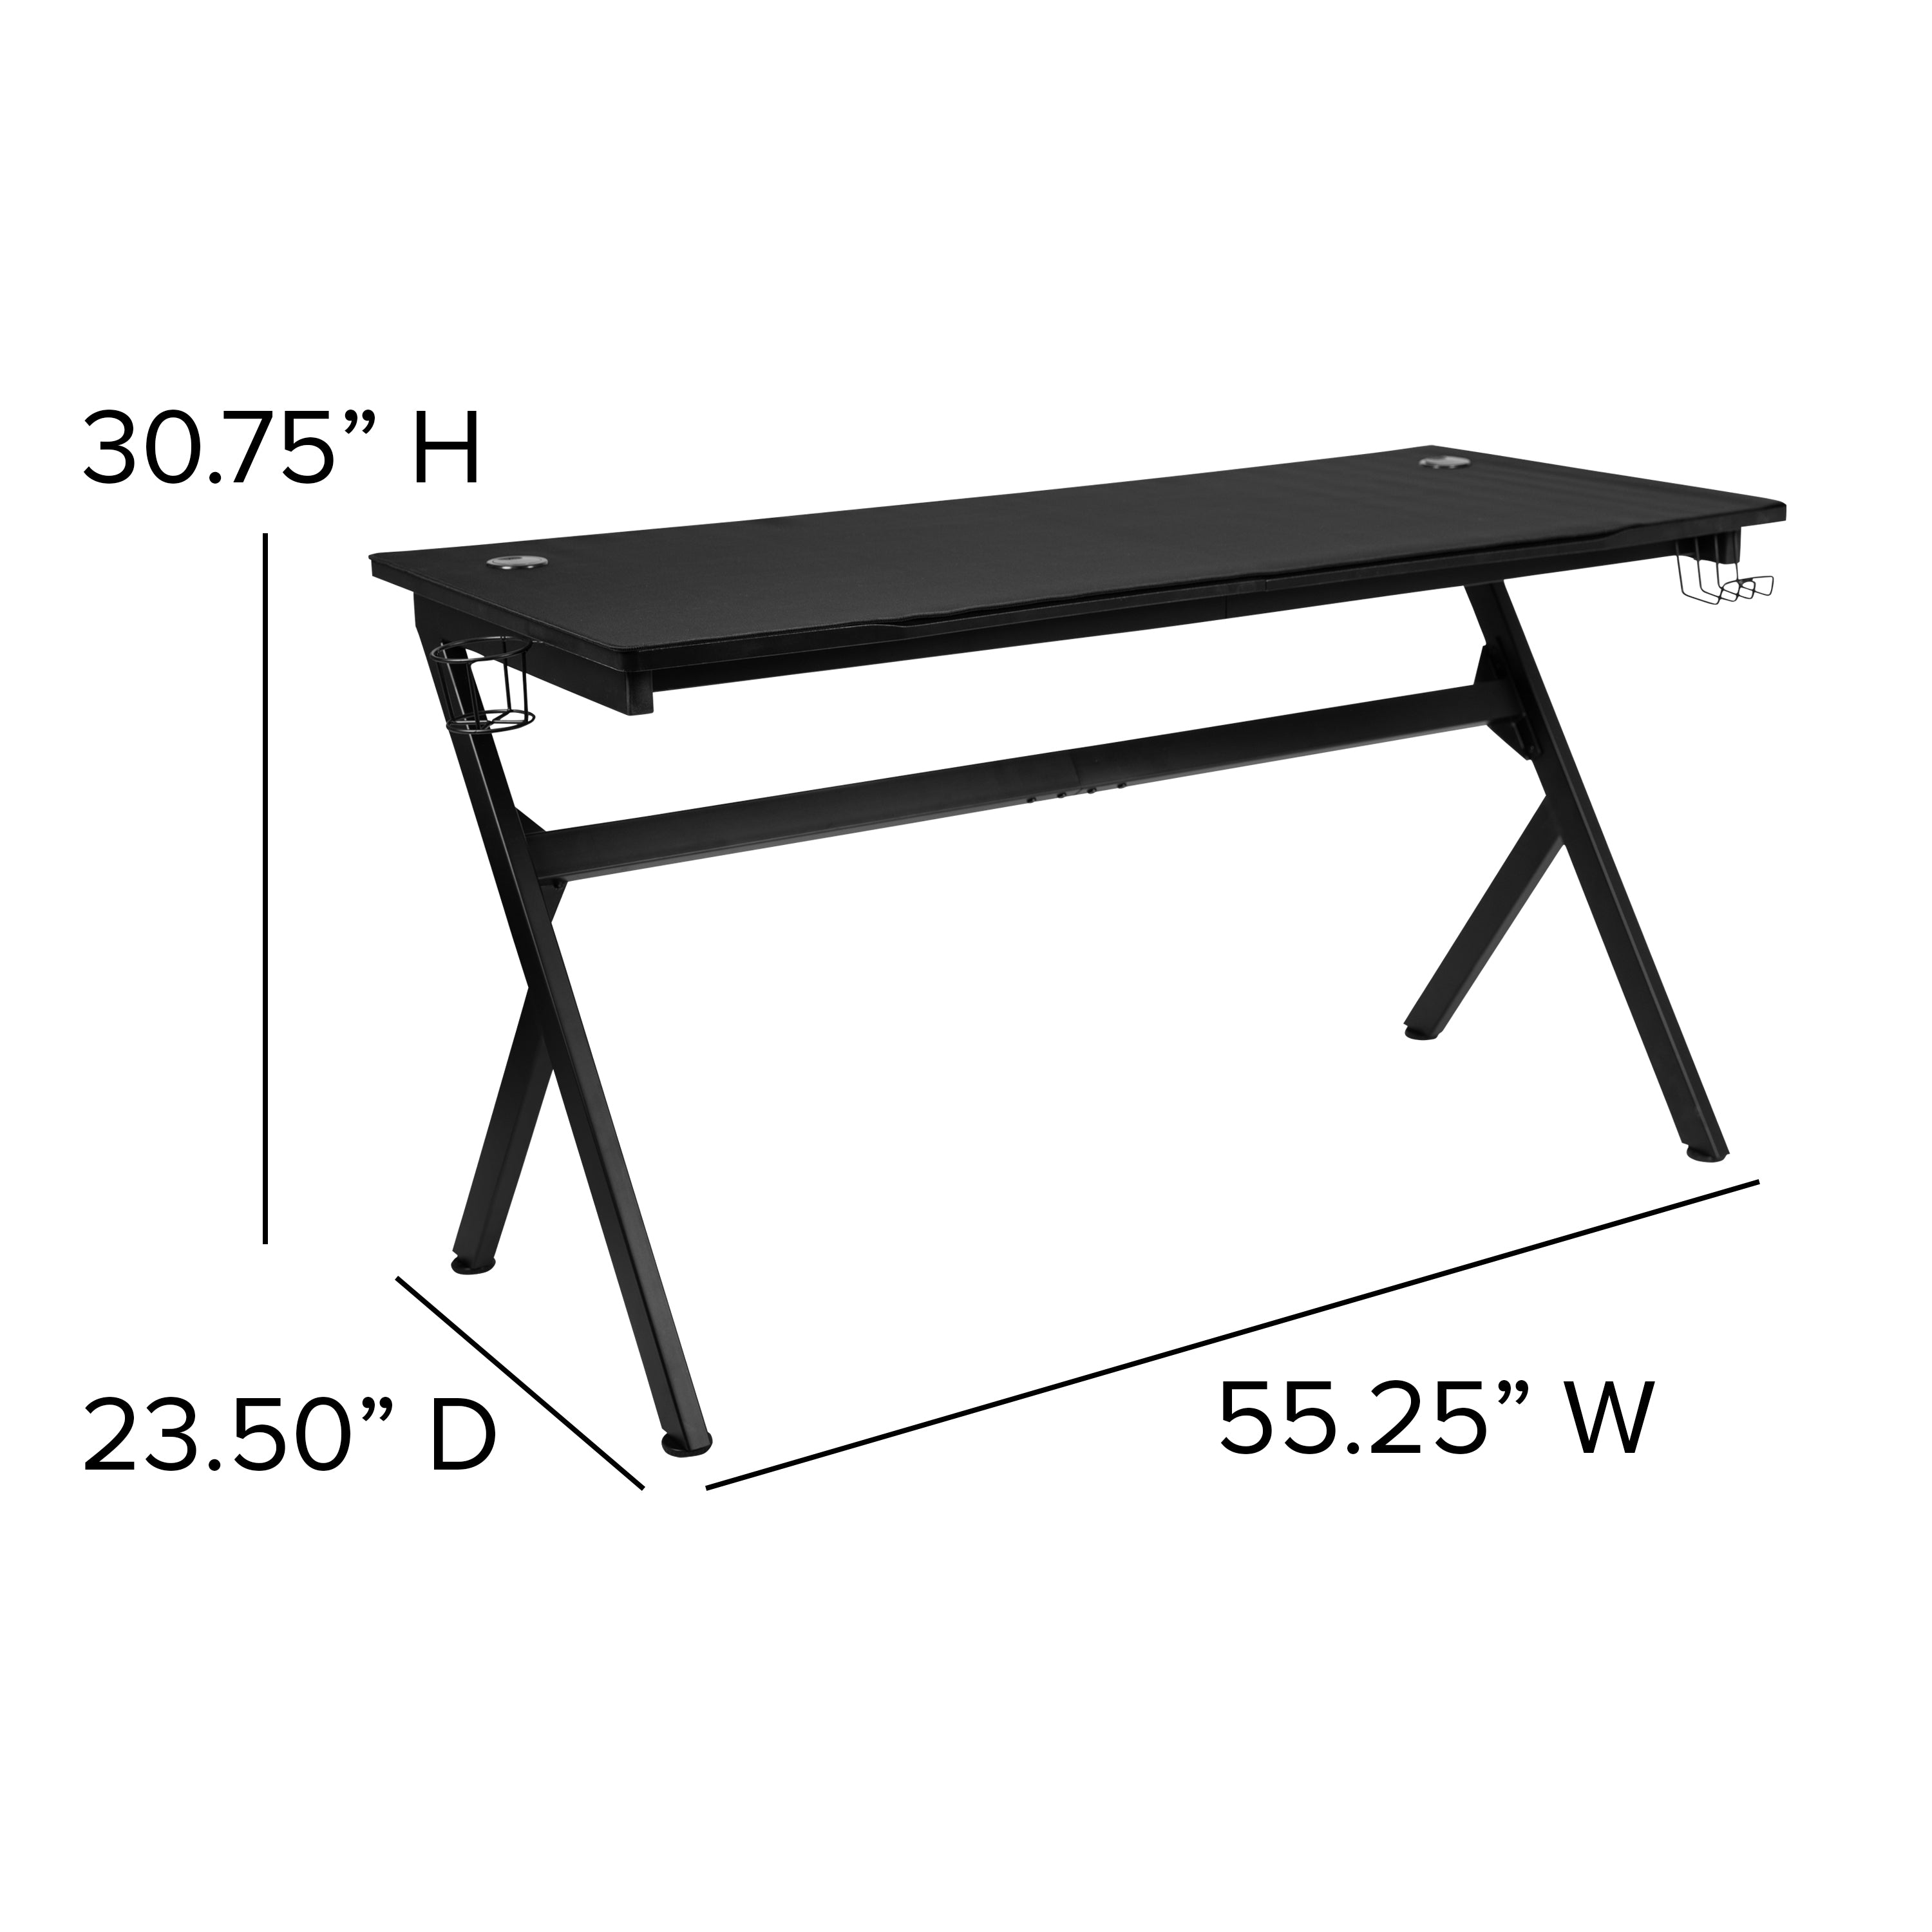 55" x 24" Extra Large Gaming Desk with Headphone Hook and Cup Holder - Free Mouse Pad-Desk-Flash Furniture-Wall2Wall Furnishings